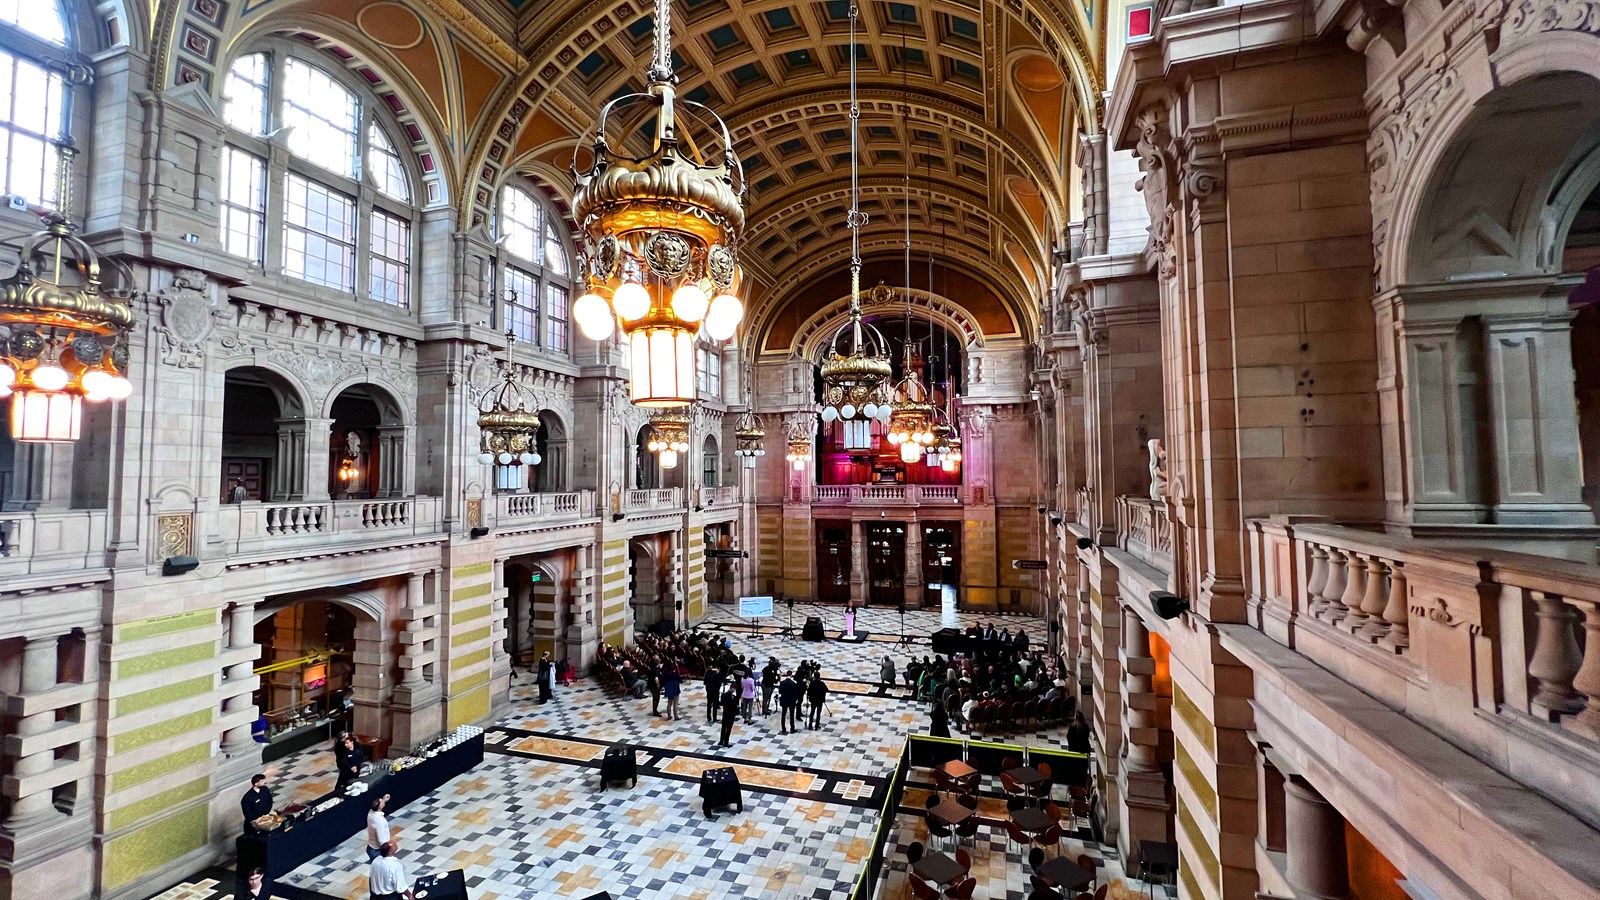 Photograph of a view of the inside of Kelvingrove Art Gallery and Museum showing the foyer, the cafe and the organ